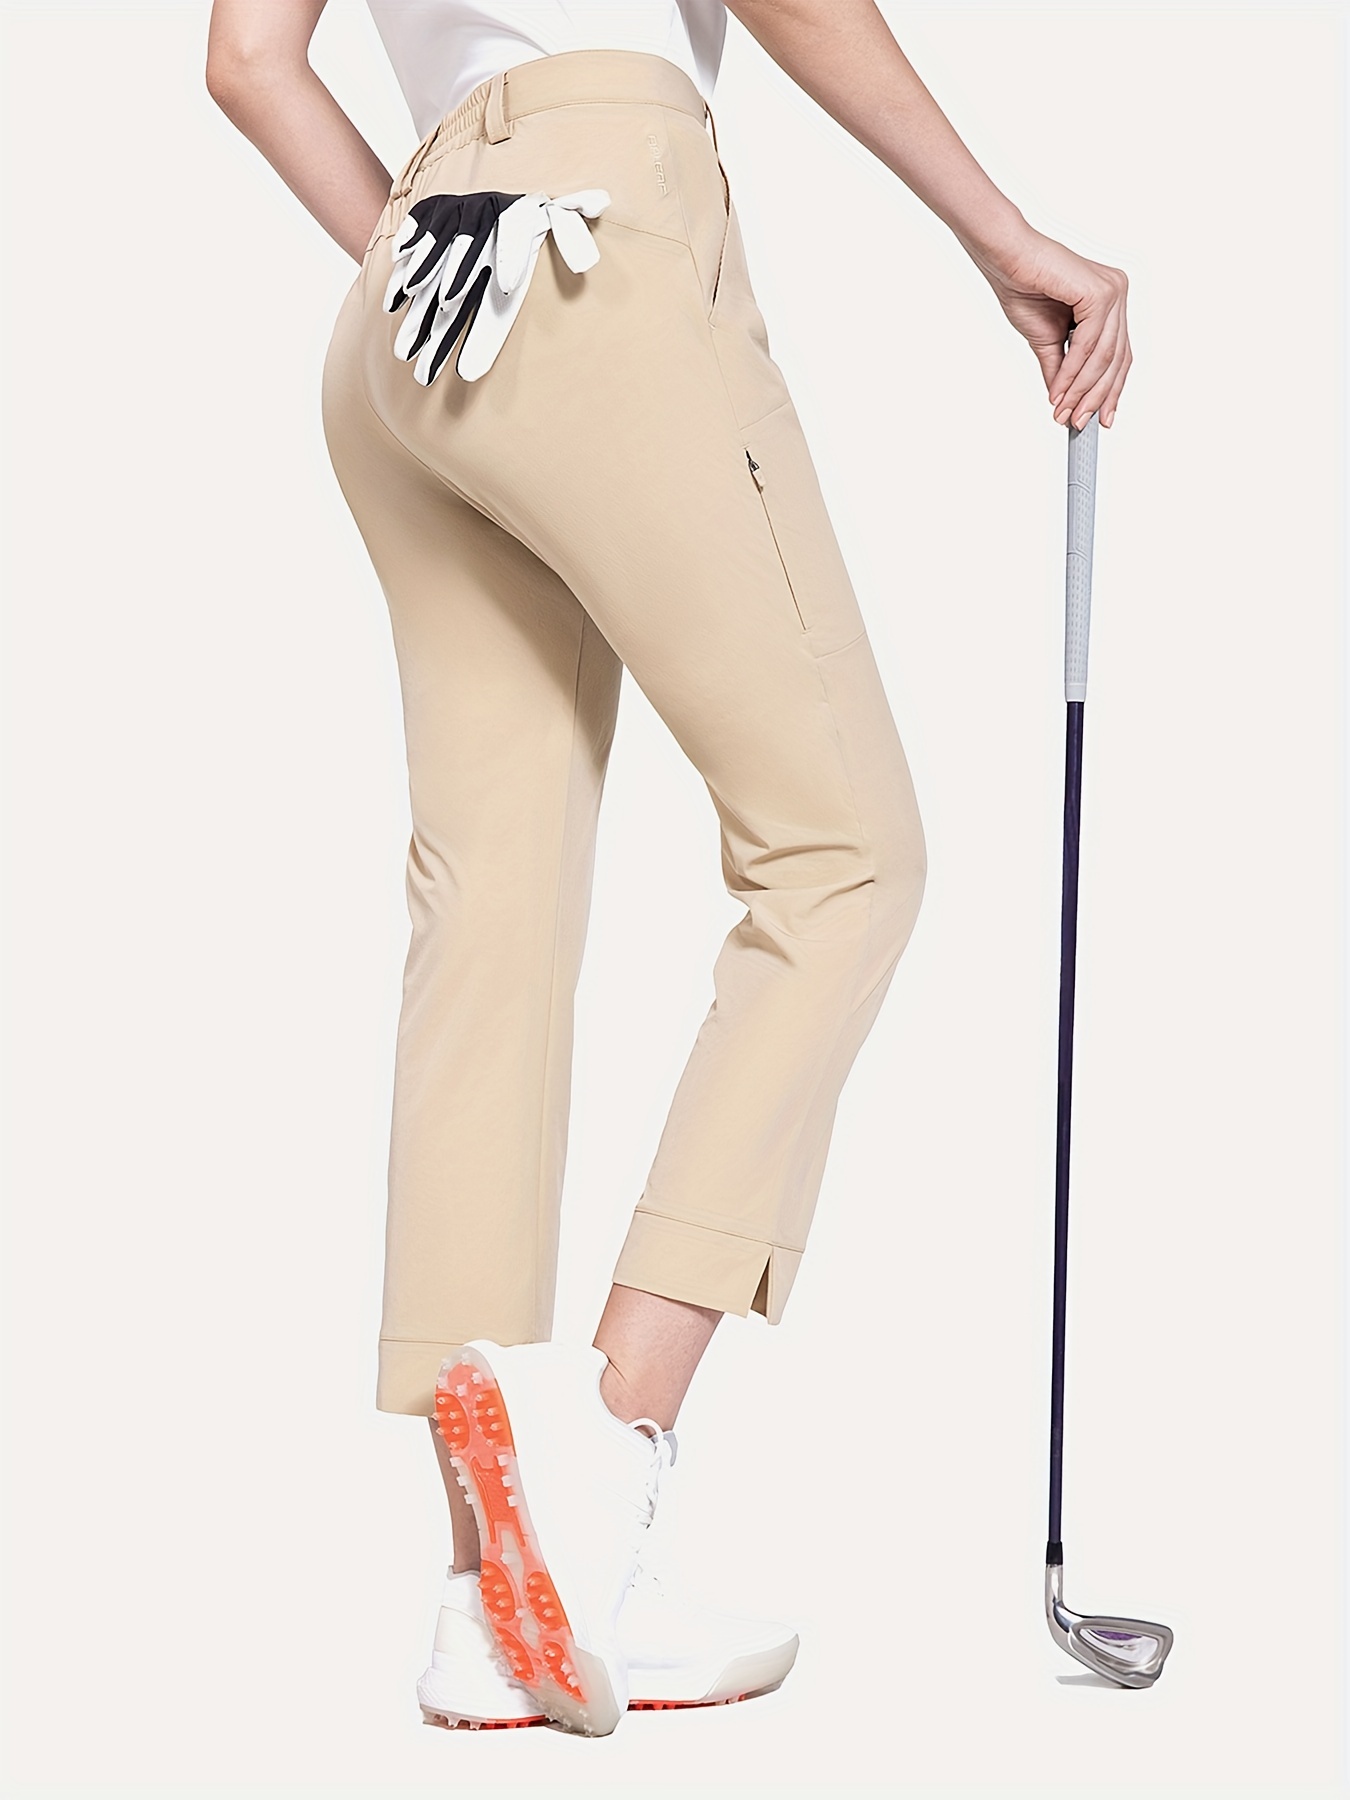  BALEAF Women's Golf Pants Stretch with 3 Pockets Pull